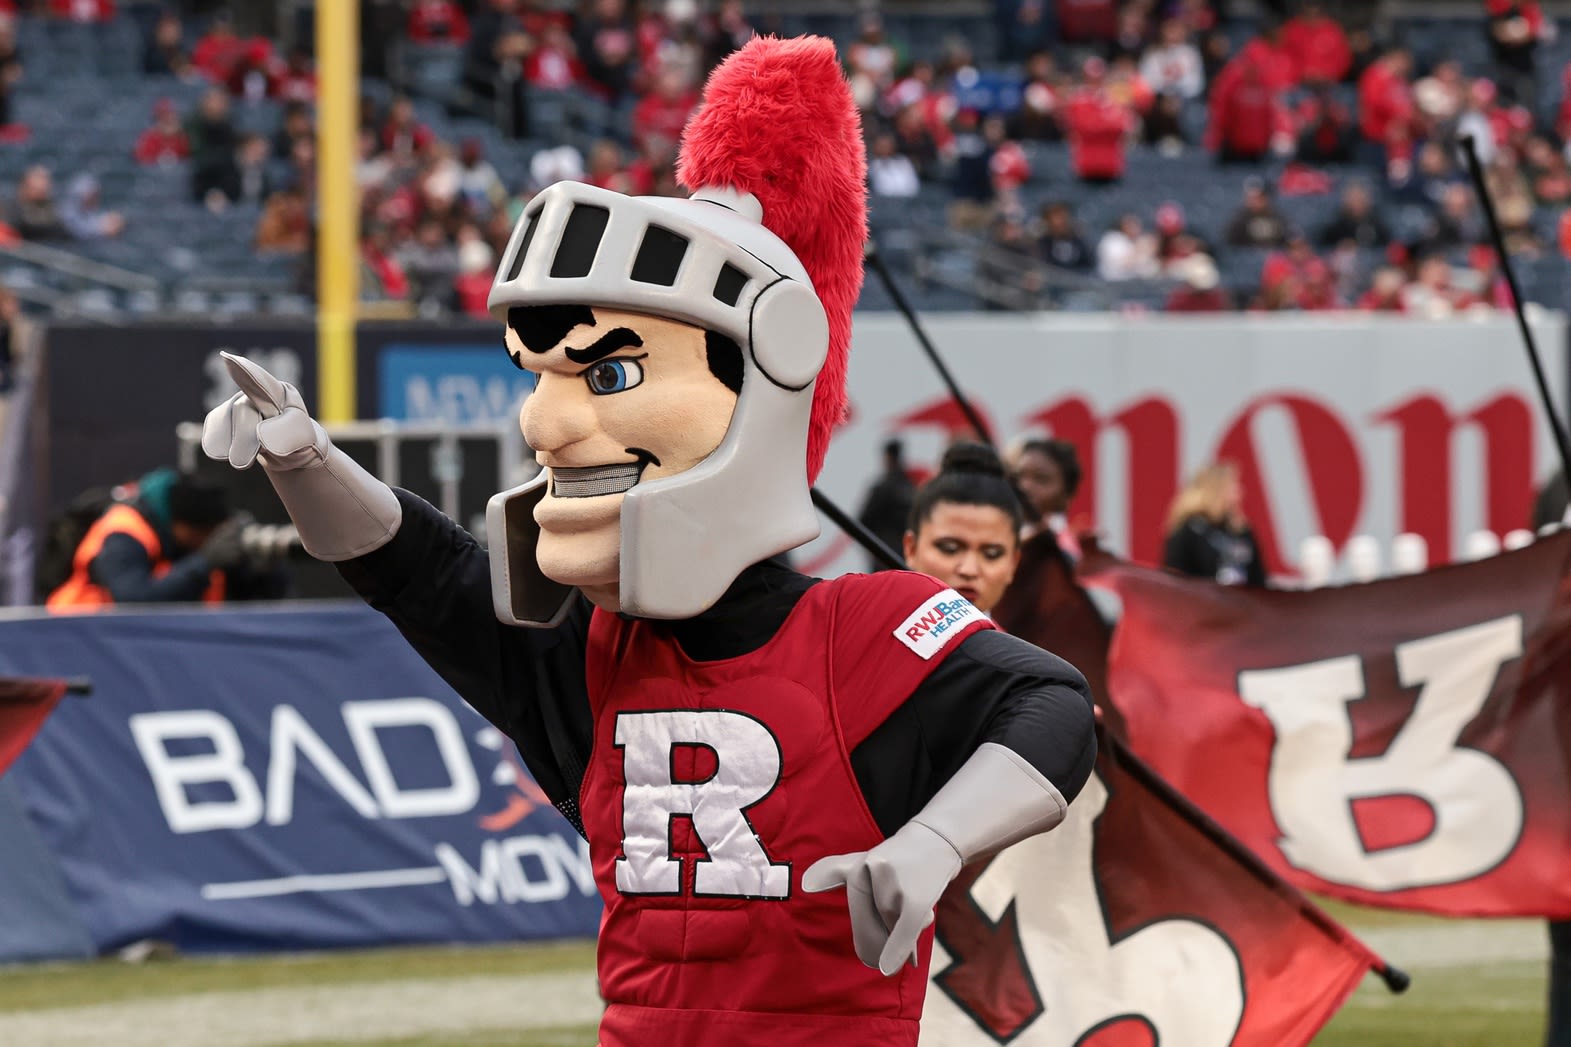 Who is Michael Clayton? Get to know the latest cornerback offered by Rutgers